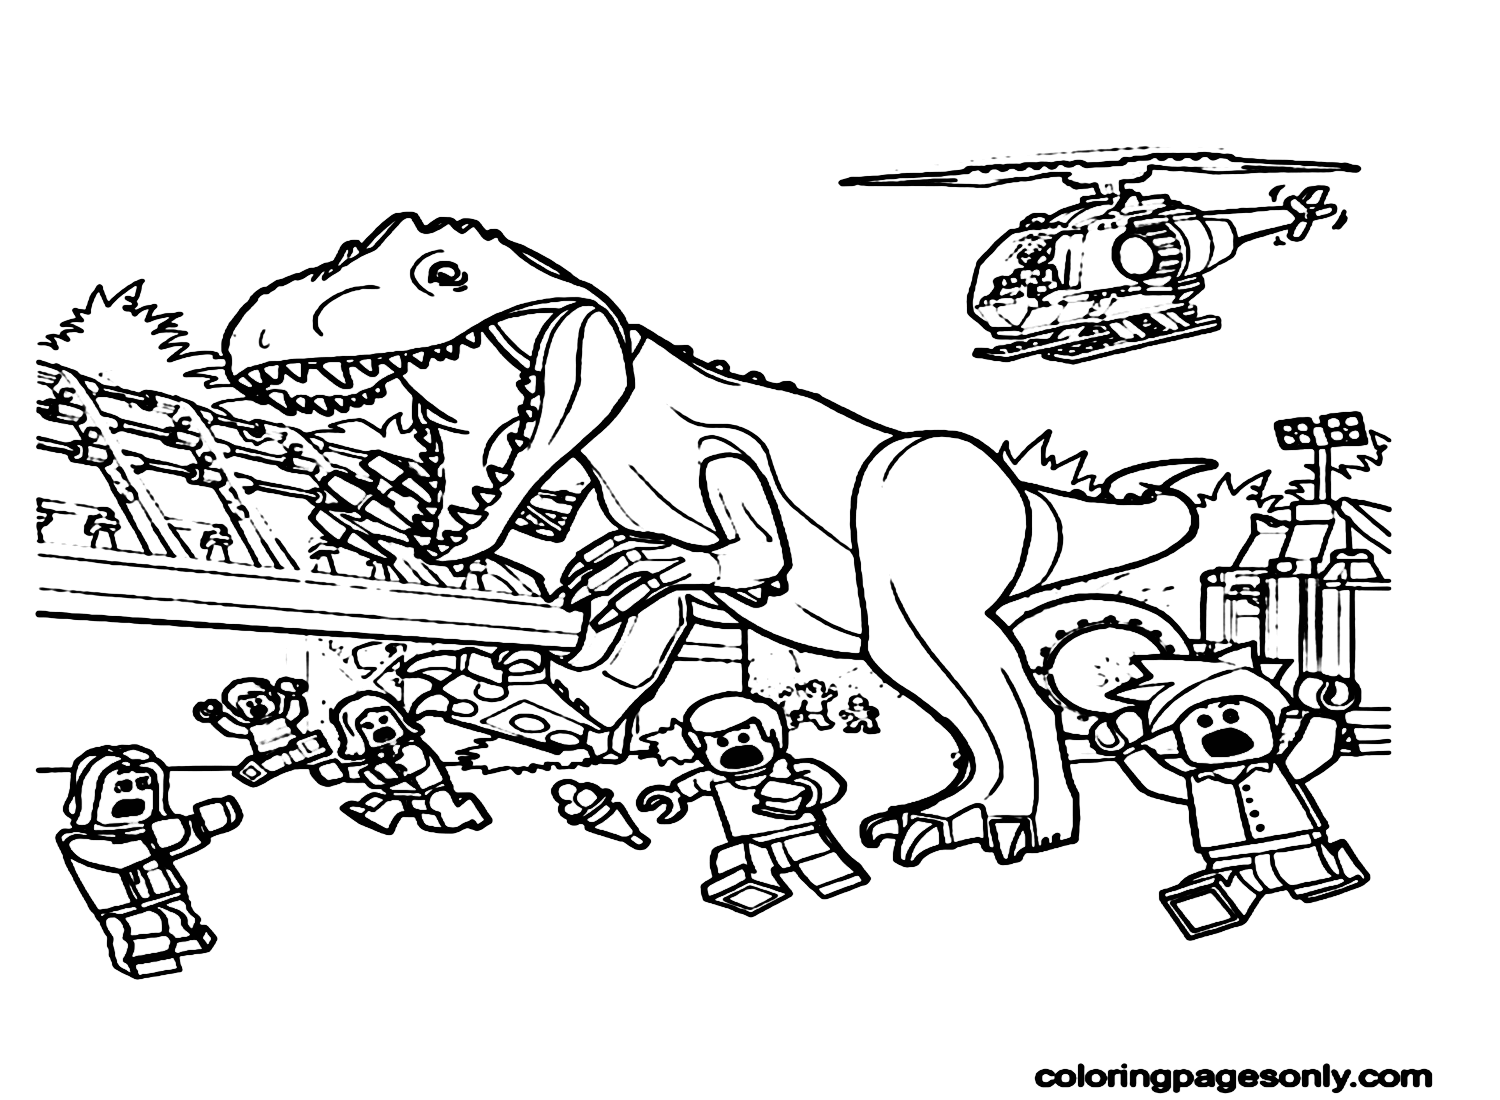 Lego Jurassic World Printable Coloring Pages